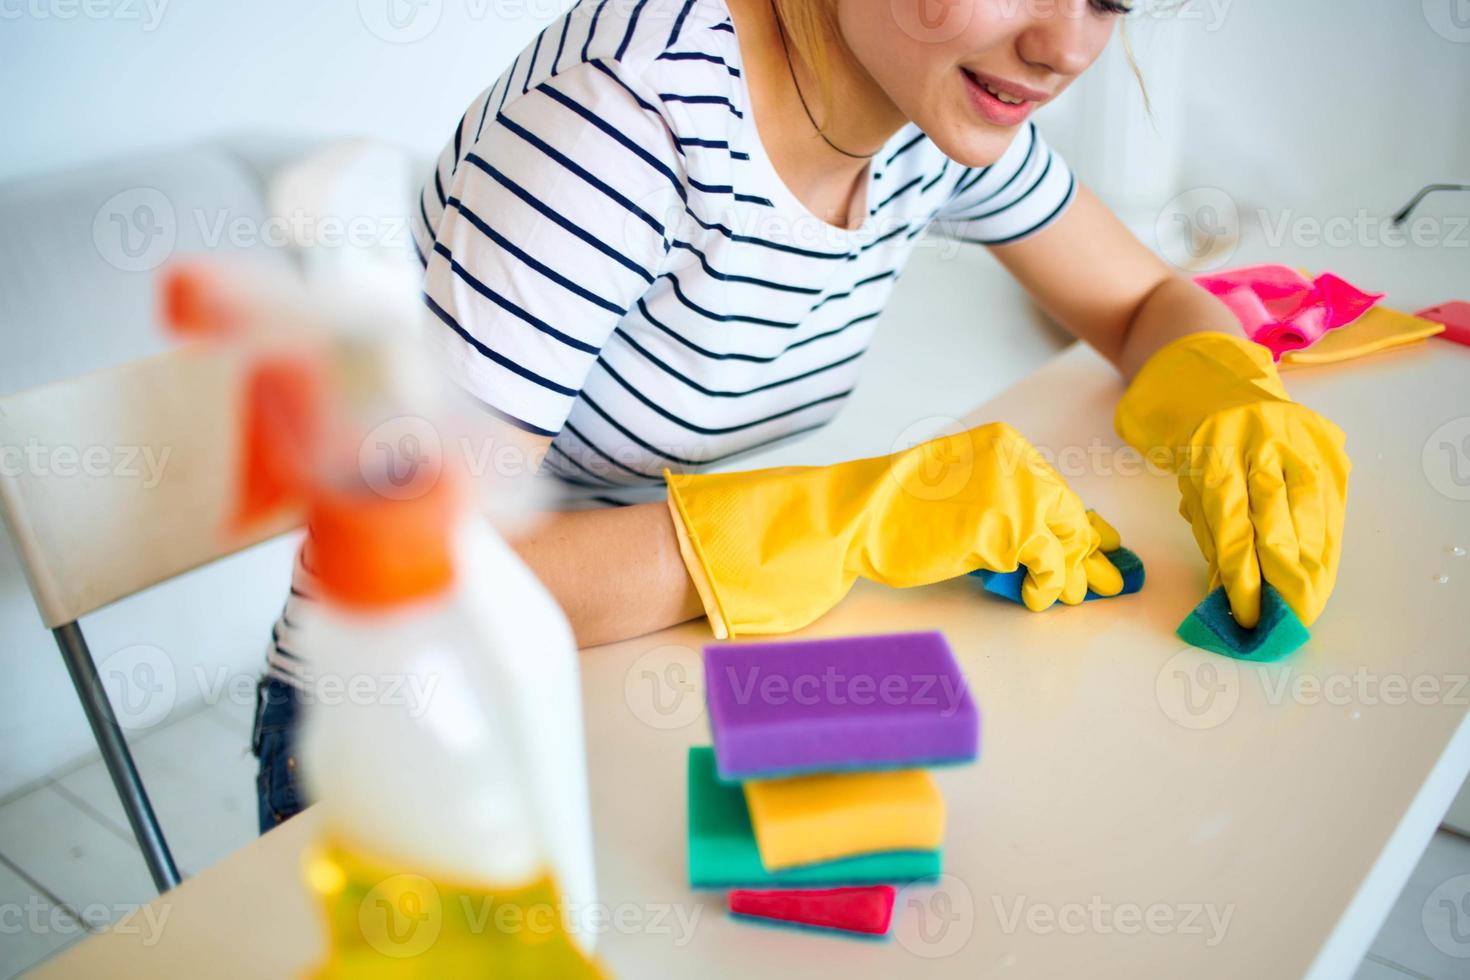 Woman cleans sponge table household cleaning service lifestyle photo